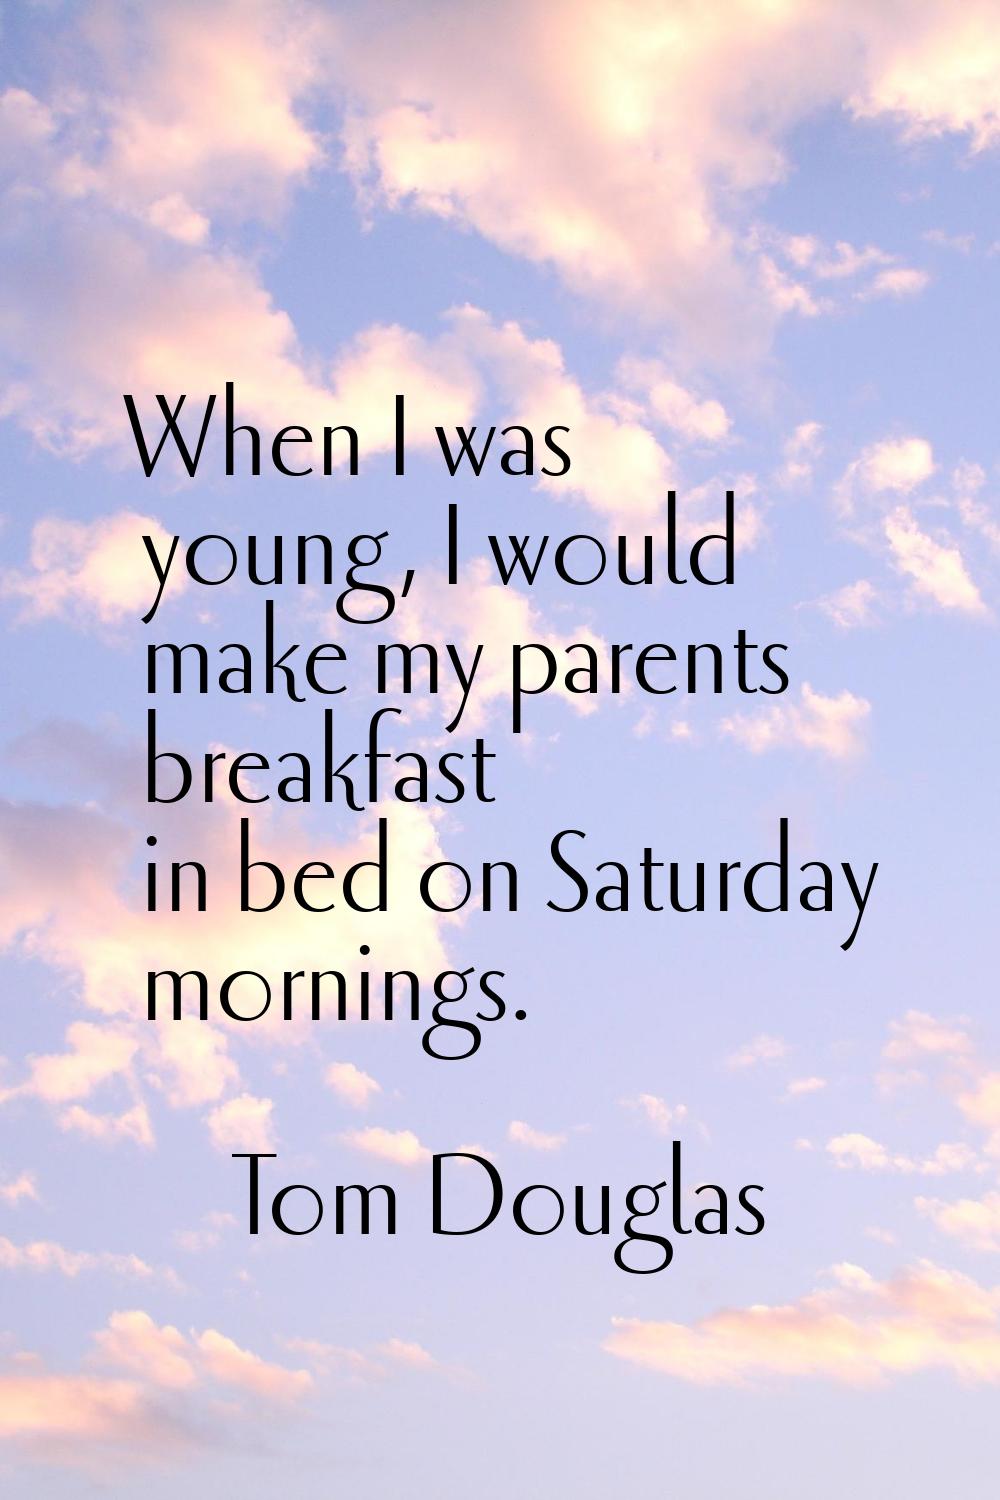 When I was young, I would make my parents breakfast in bed on Saturday mornings.